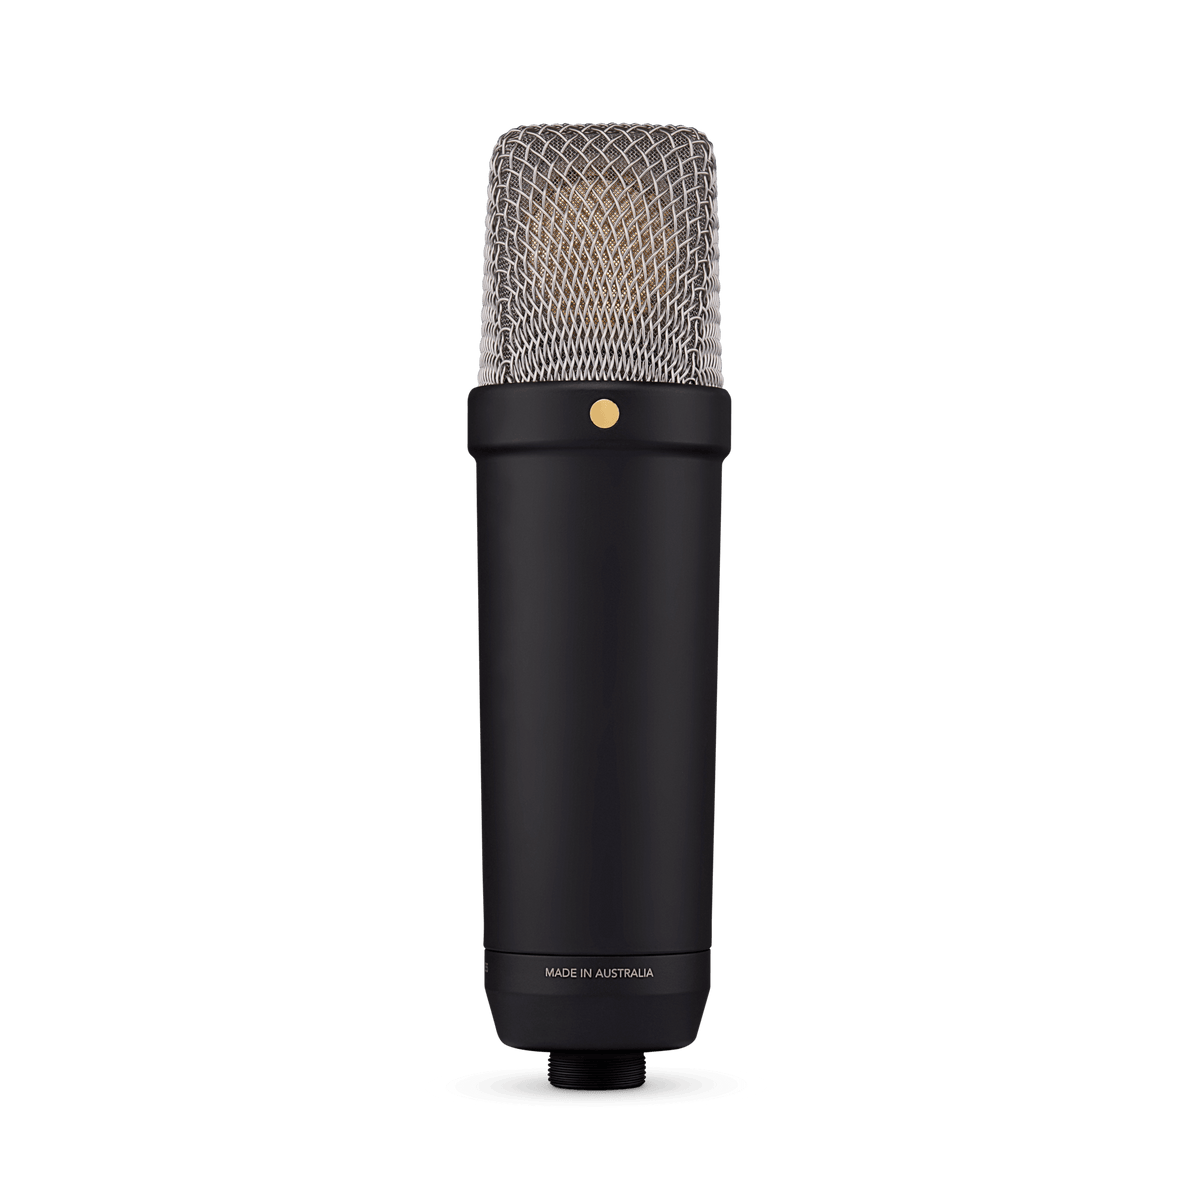 Rode announces NT1 5th Generation microphone - Videomaker